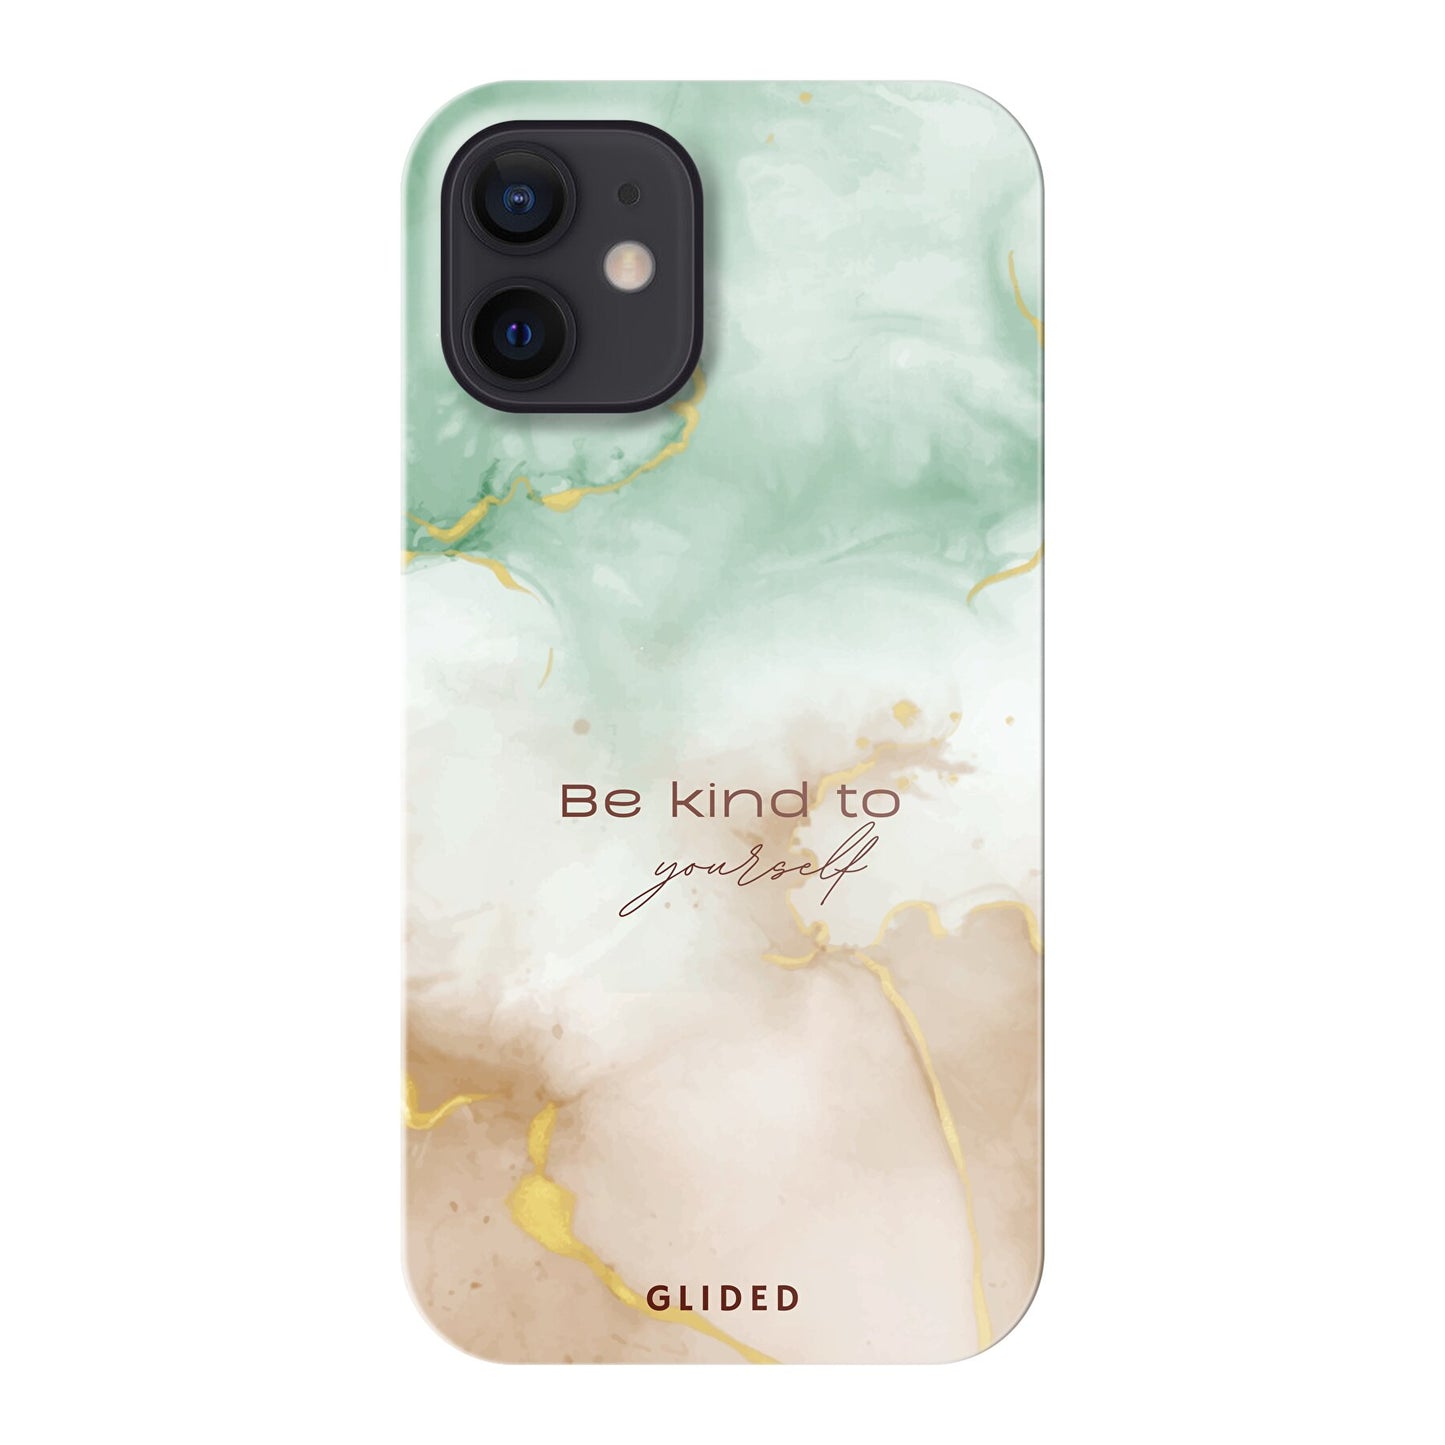 Kind to yourself - iPhone 12 mini Handyhülle Hard Case